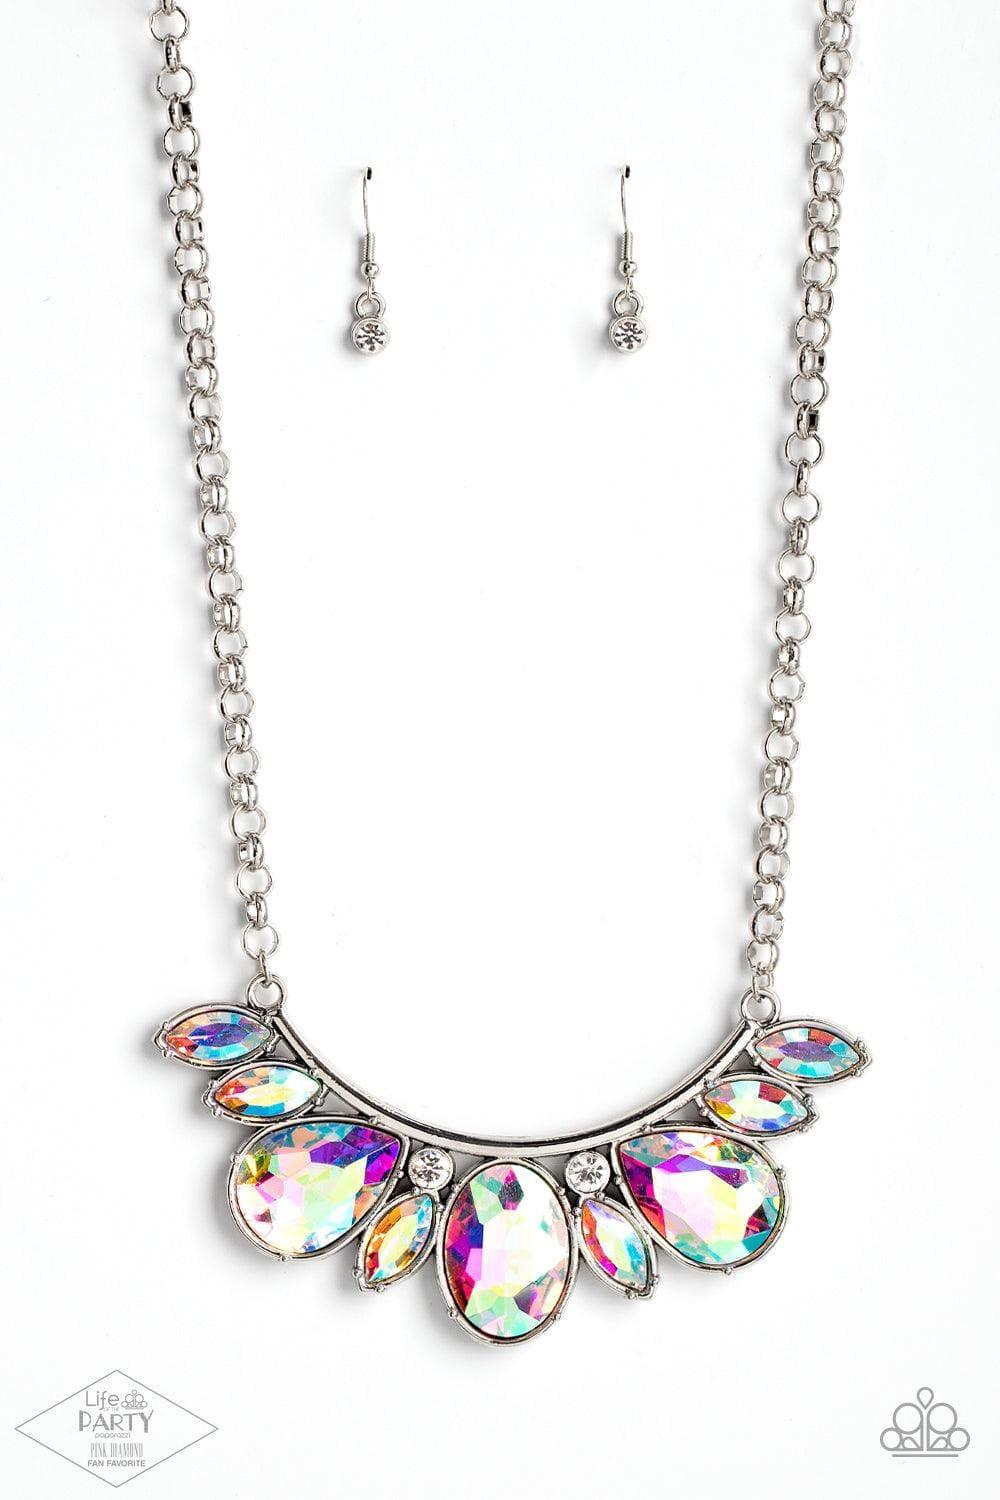 Paparazzi Accessories - Never Slay Never - Iridescent Necklace - Bling by JessieK